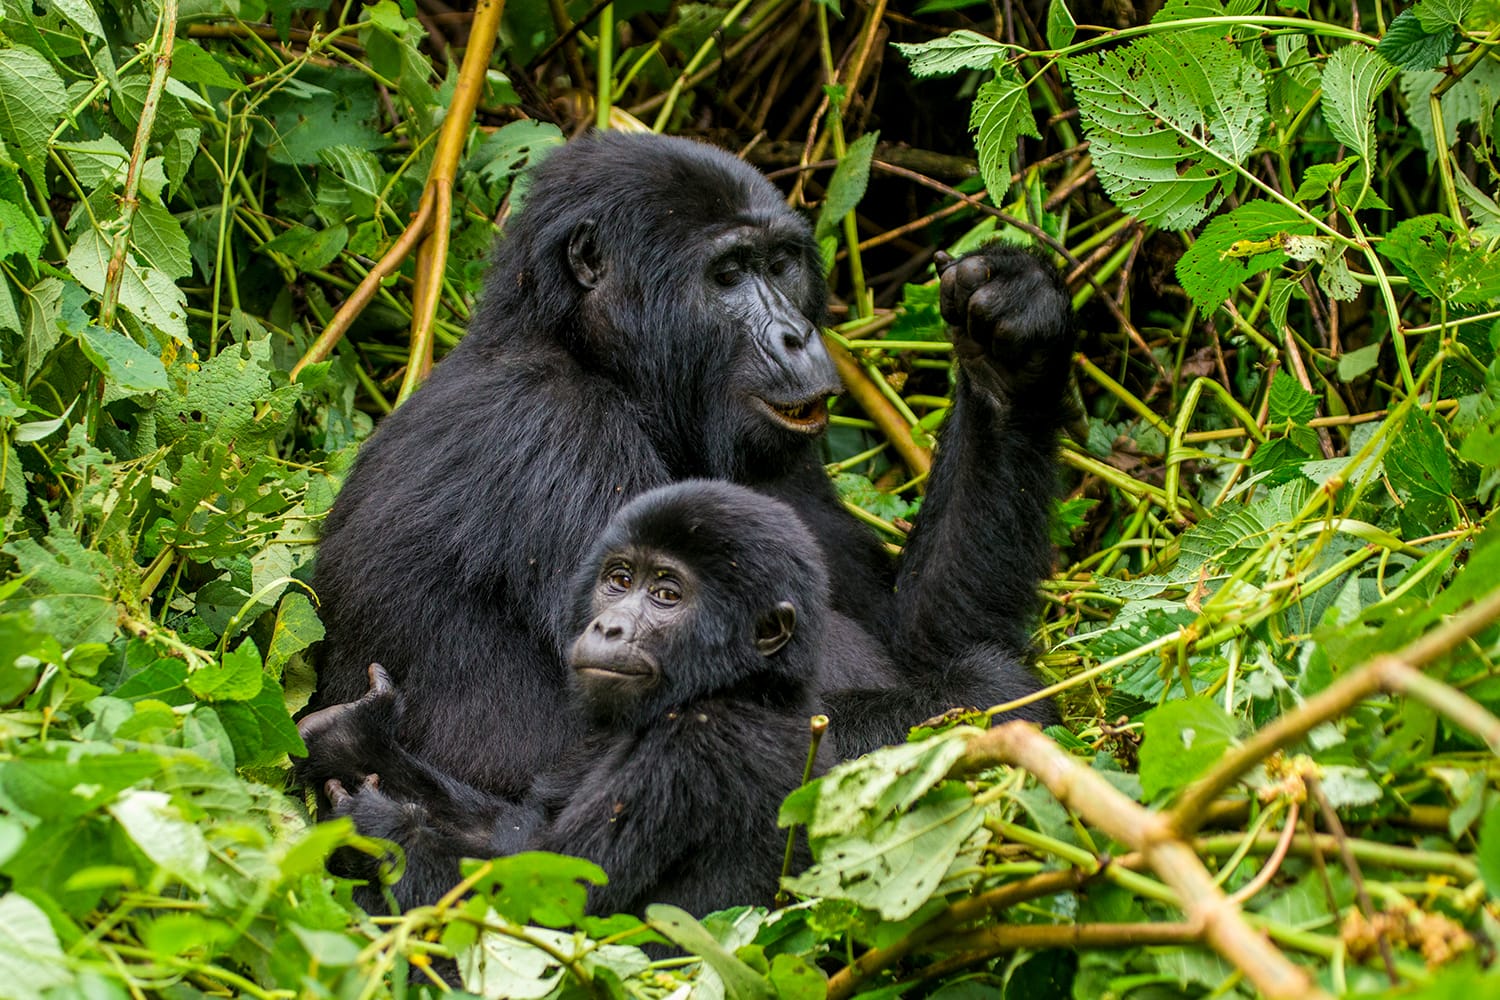 A female mountain gorilla with a baby. Uganda. Bwindi Impenetrable Forest National Park